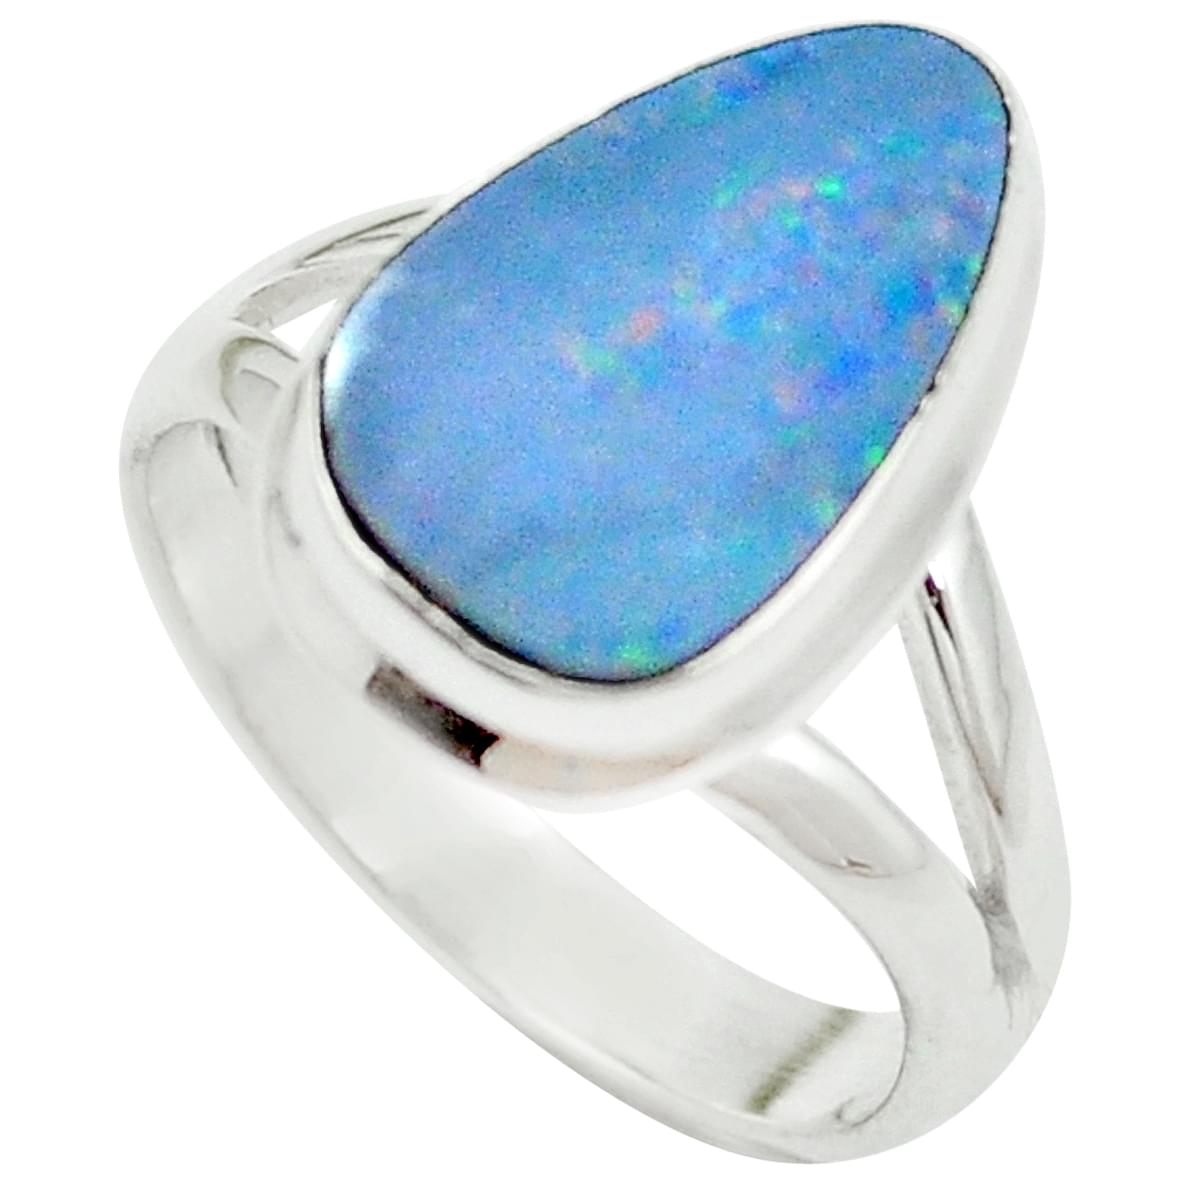 Details about   WHITE OPAL RING W/ Cubic Zirconia Stone Authentic.925 Solid Sterling  4 TO 12